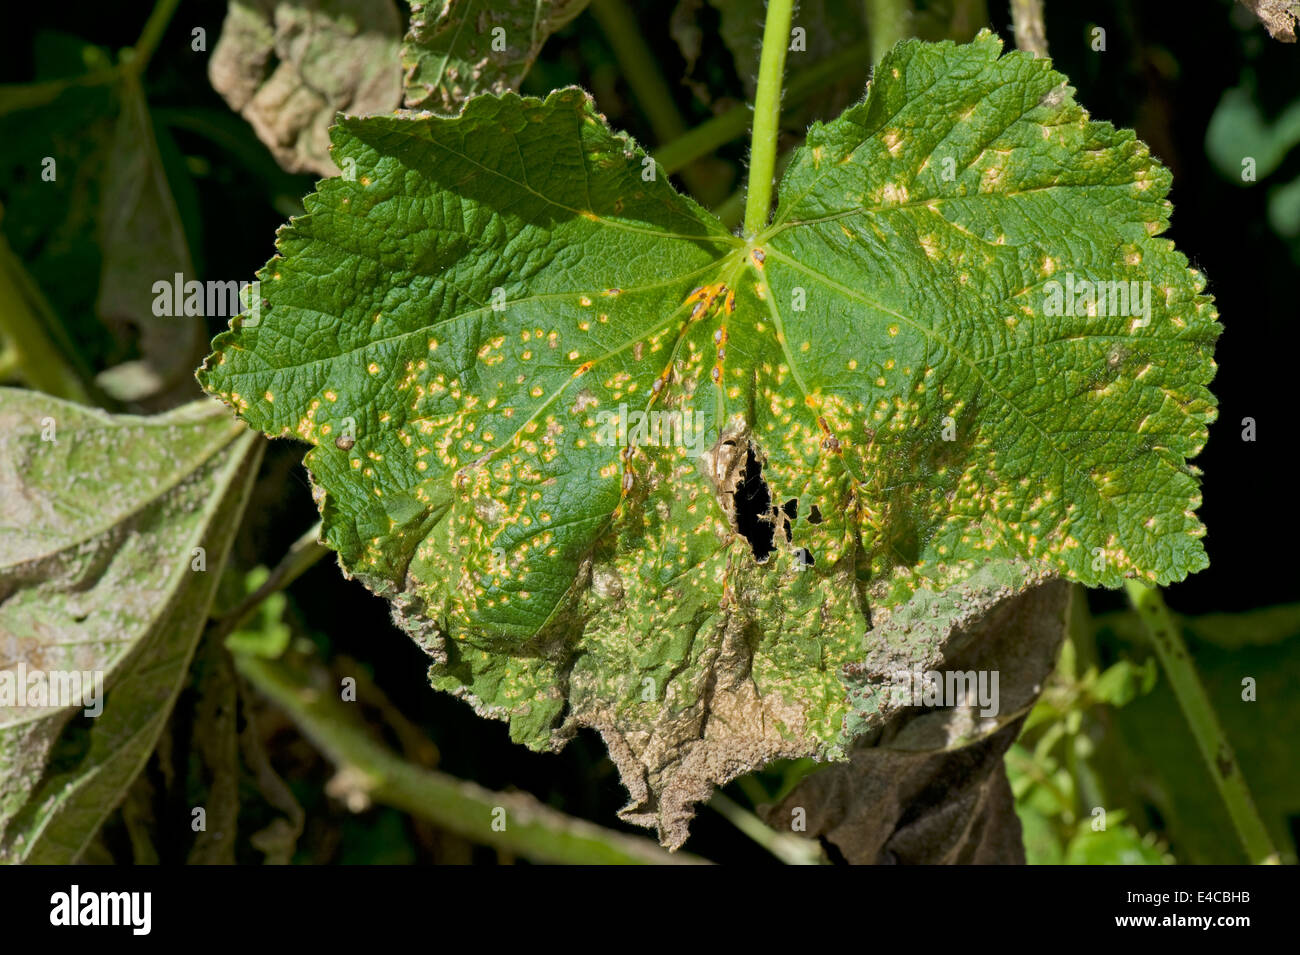 Hollyhock rust, Puccinia malvacearum, severe damage anf spotting on the top surface of a hollyhock leaf Stock Photo